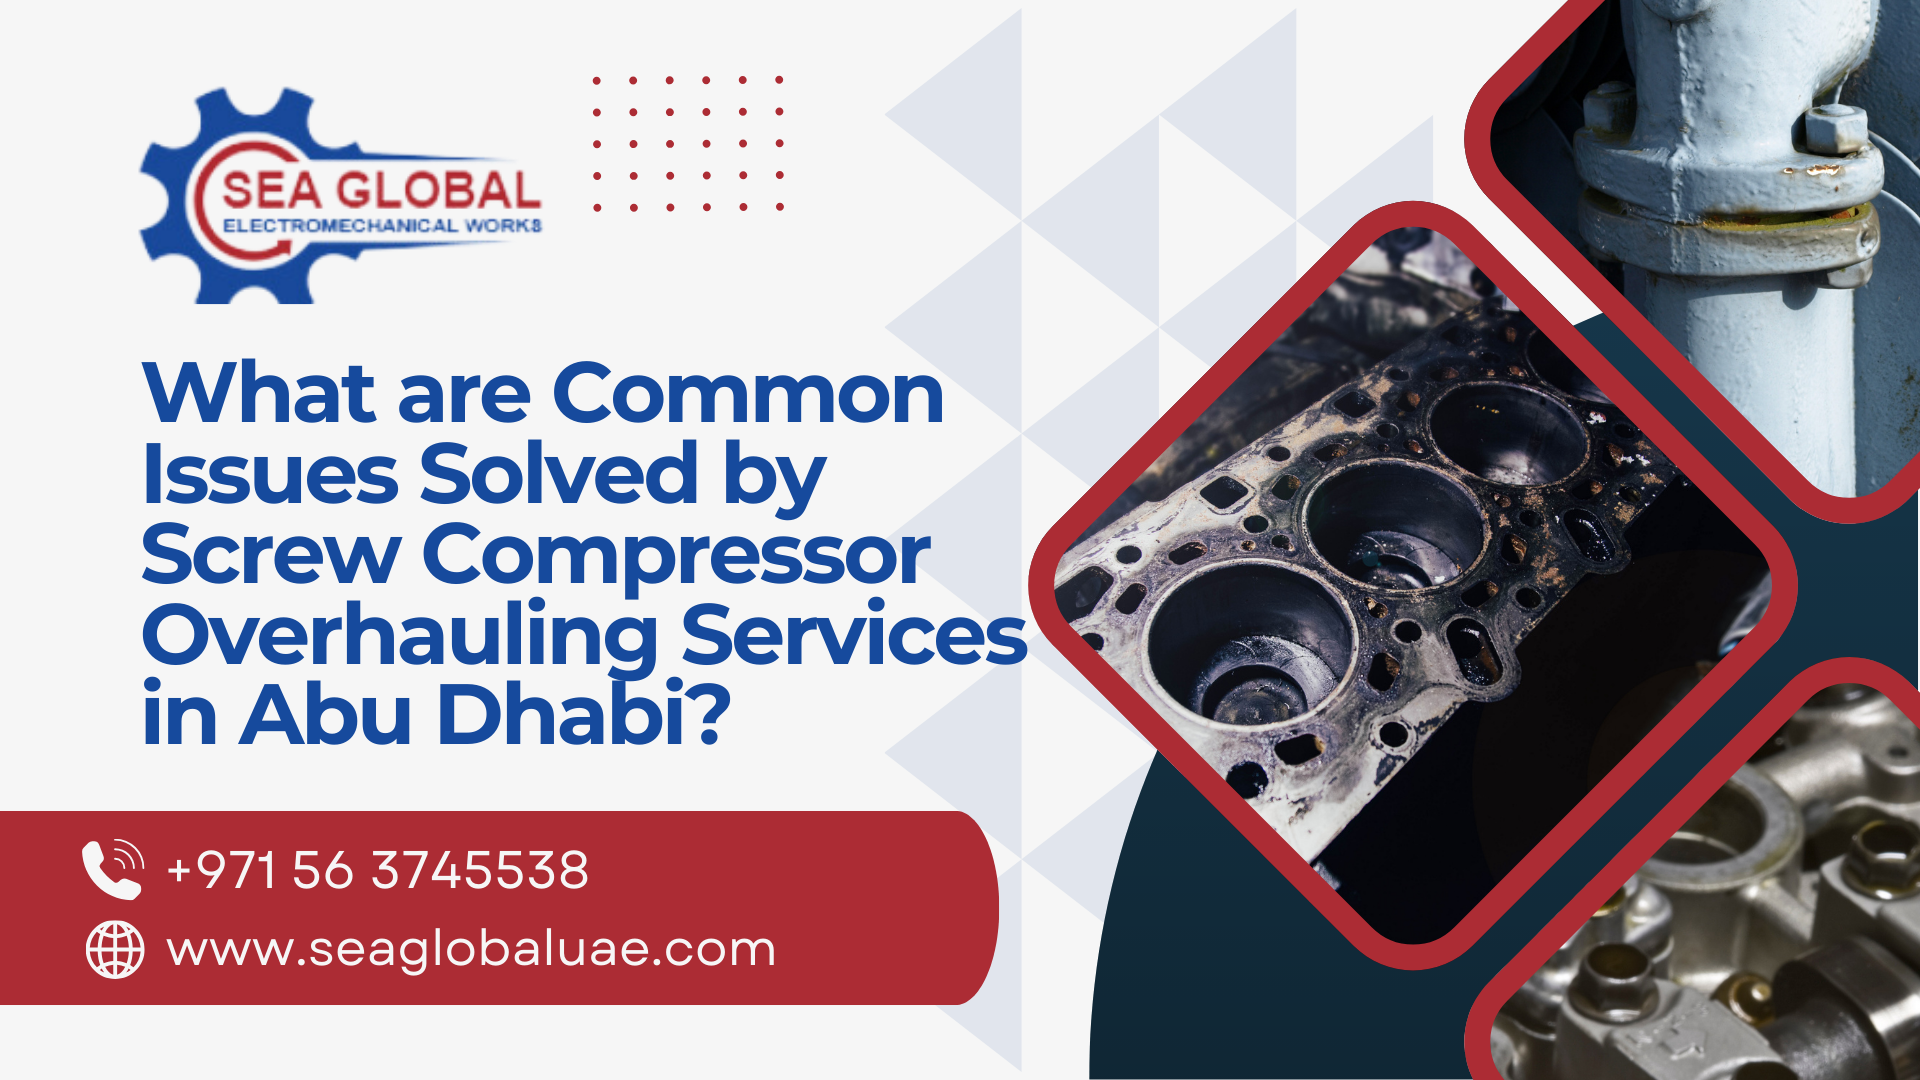 What are Common Issues Solved by Screw Compressor Overhauling Services in Abu Dhabi?